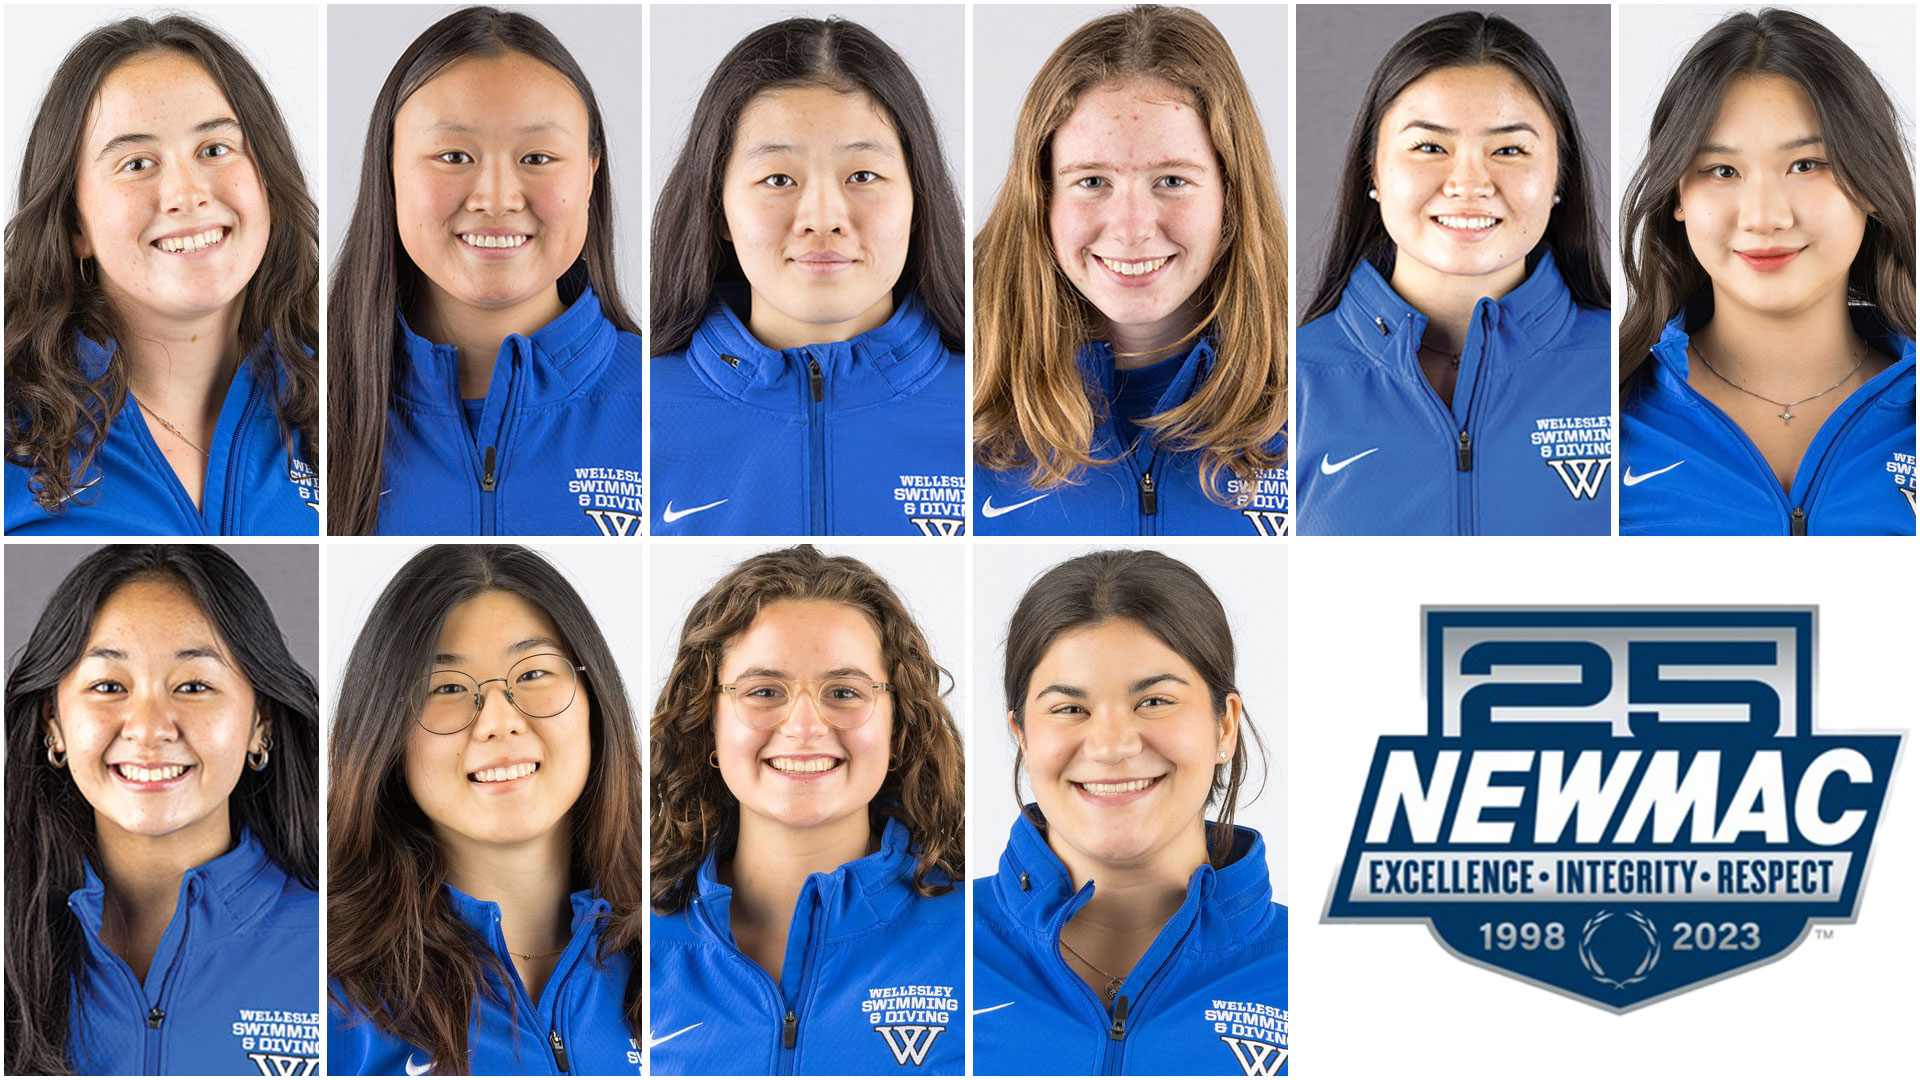 10 members of Wellesley swimming and diving made the NEWMAC Academic All-Conference team